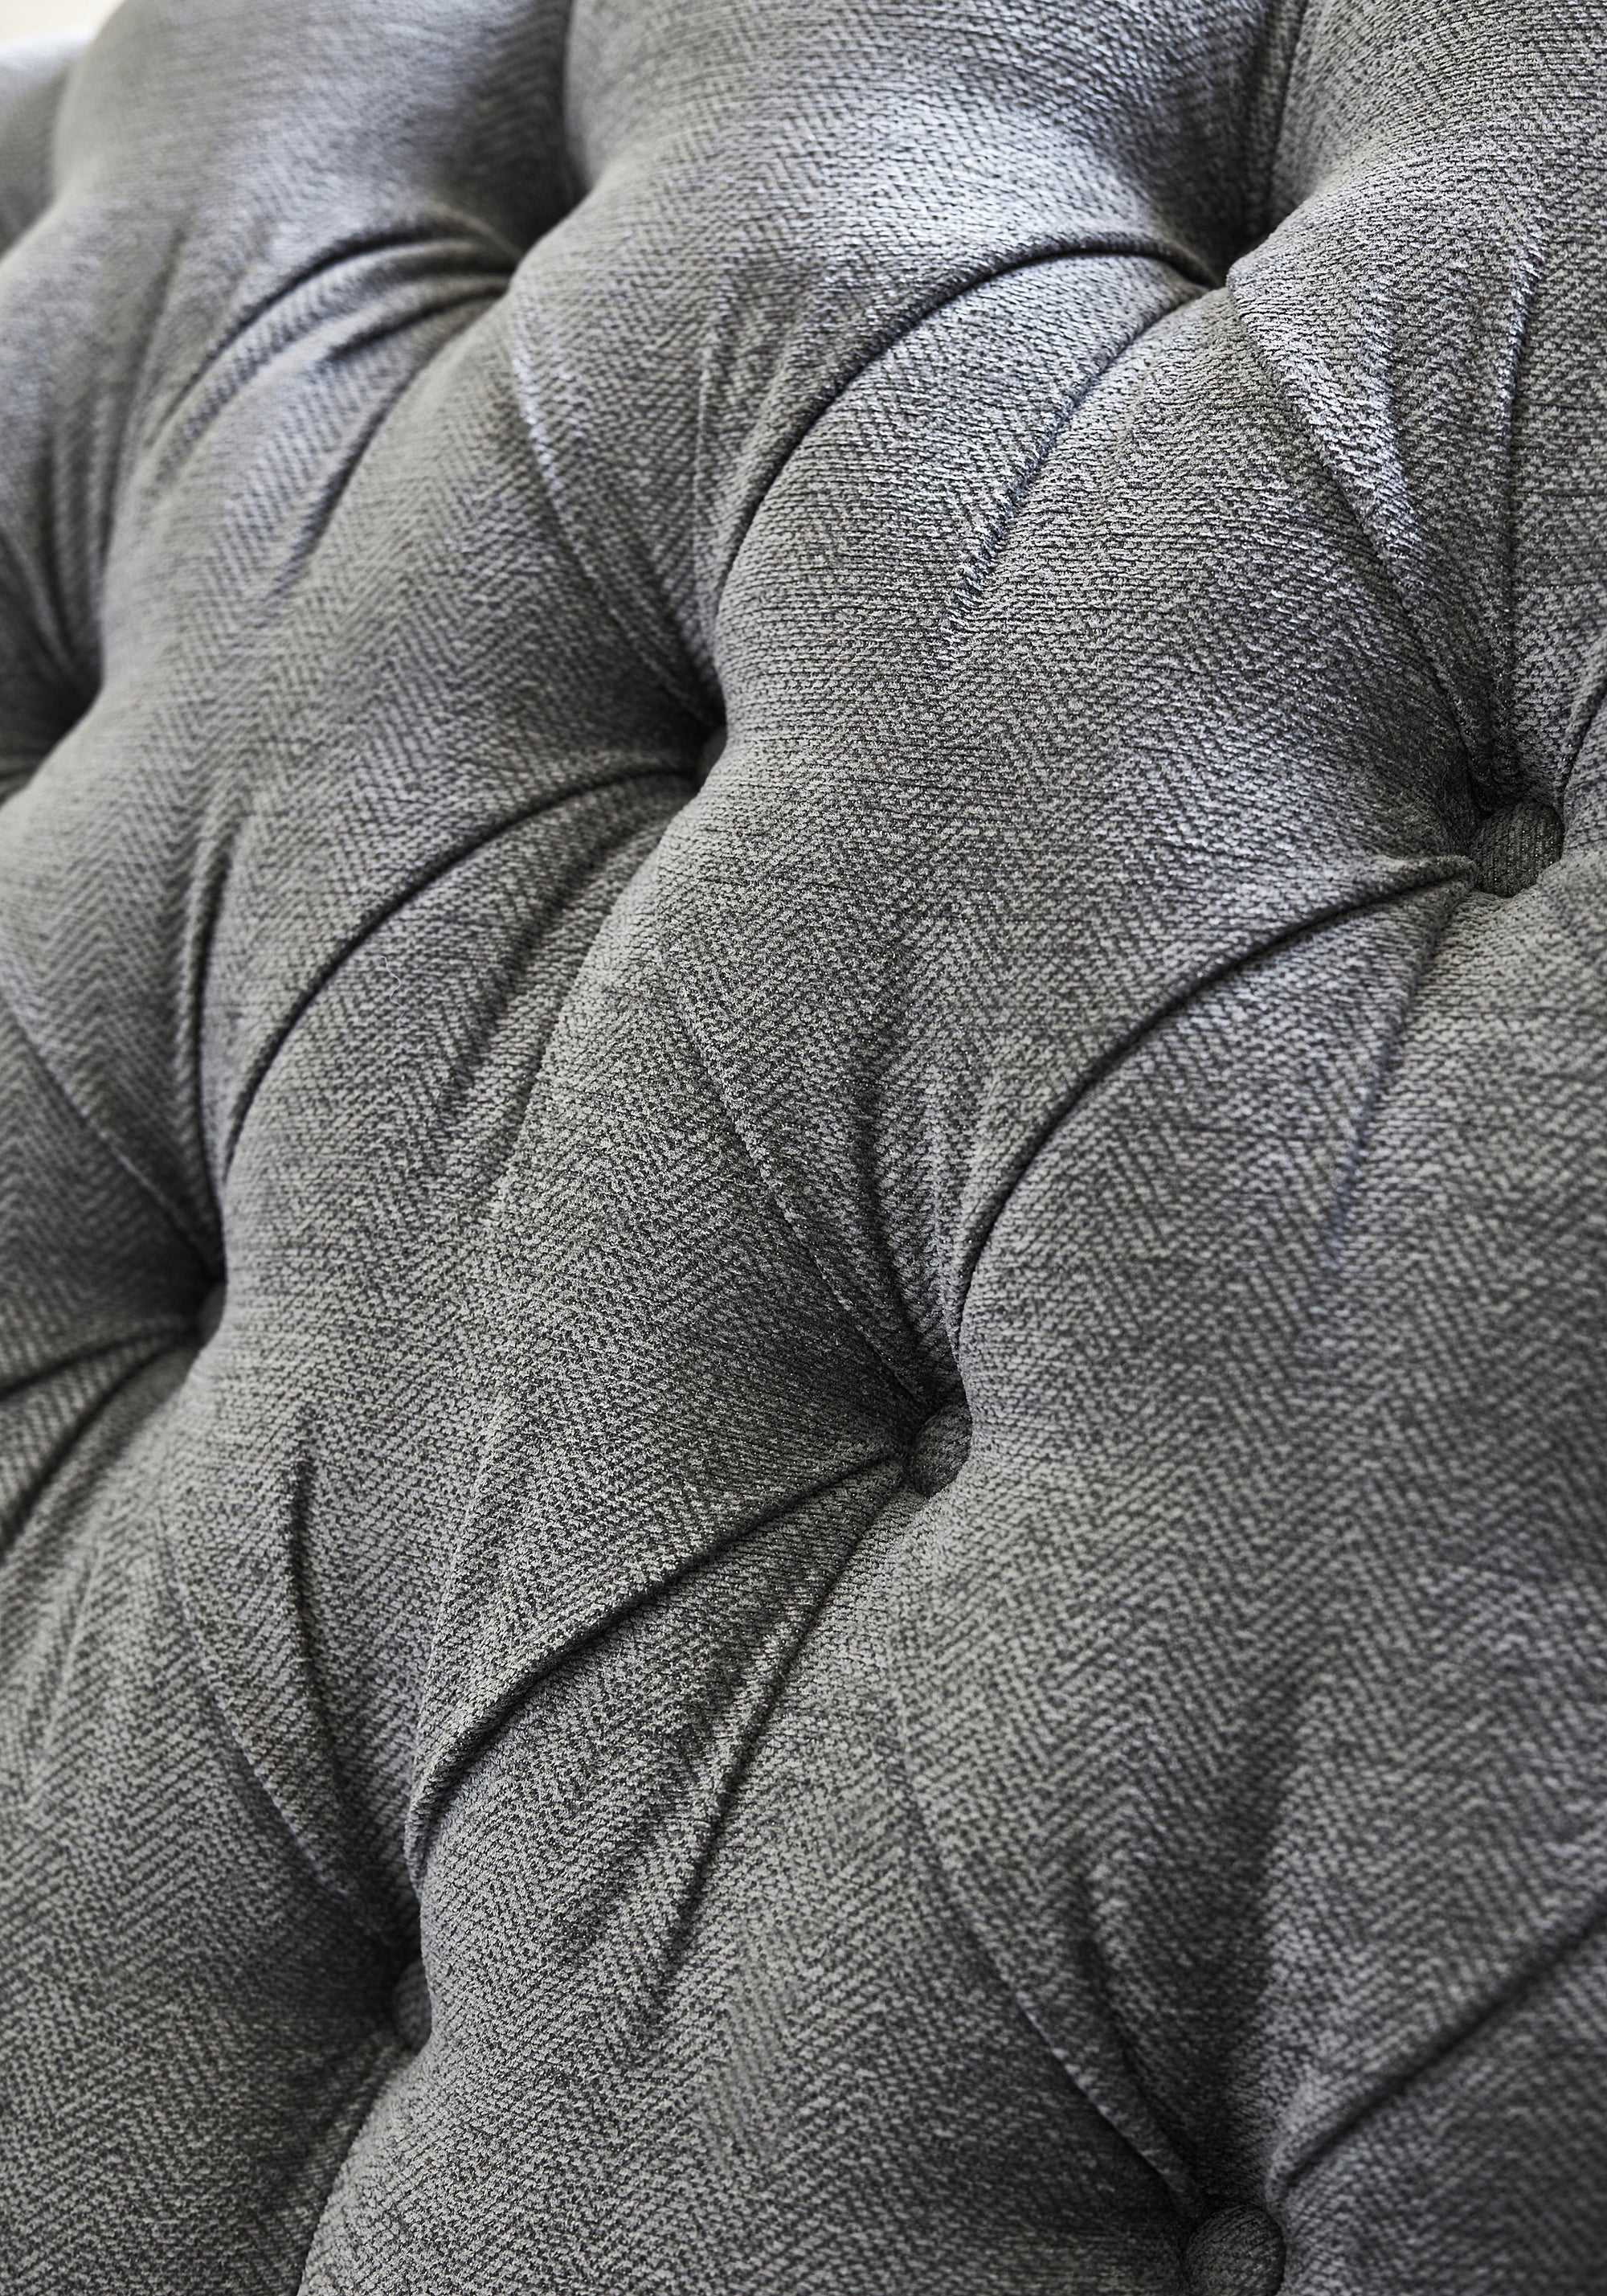 Detailed Bronwyn Herringbone woven fabric in charcoal color, pattern number W80685 of the Thibaut Pinnacle collection